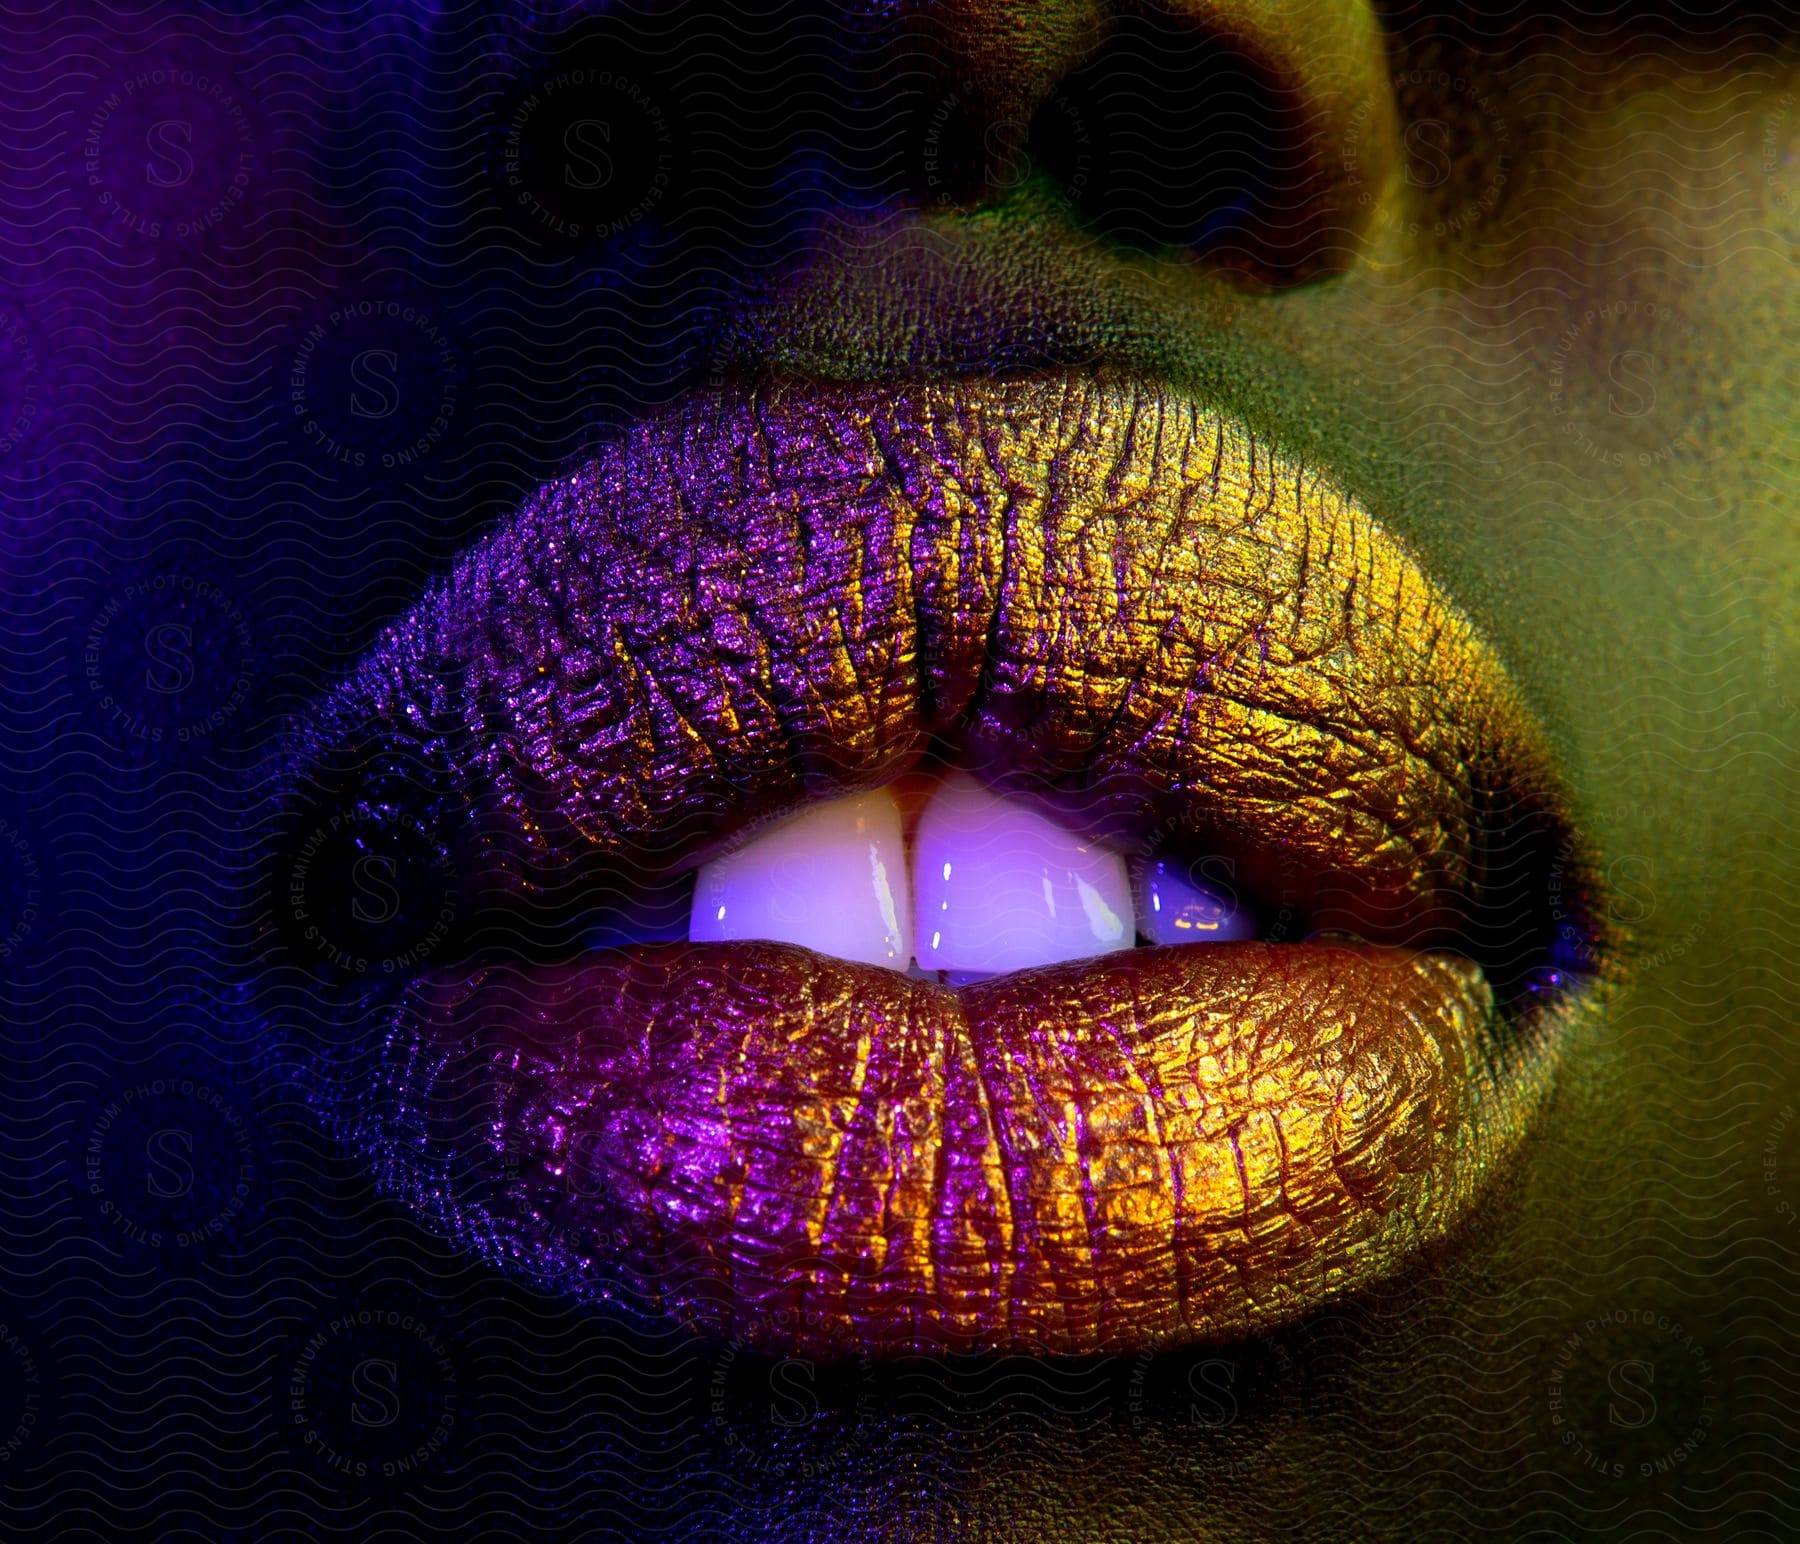 Extreme close-up of a person's lips with lipstick.